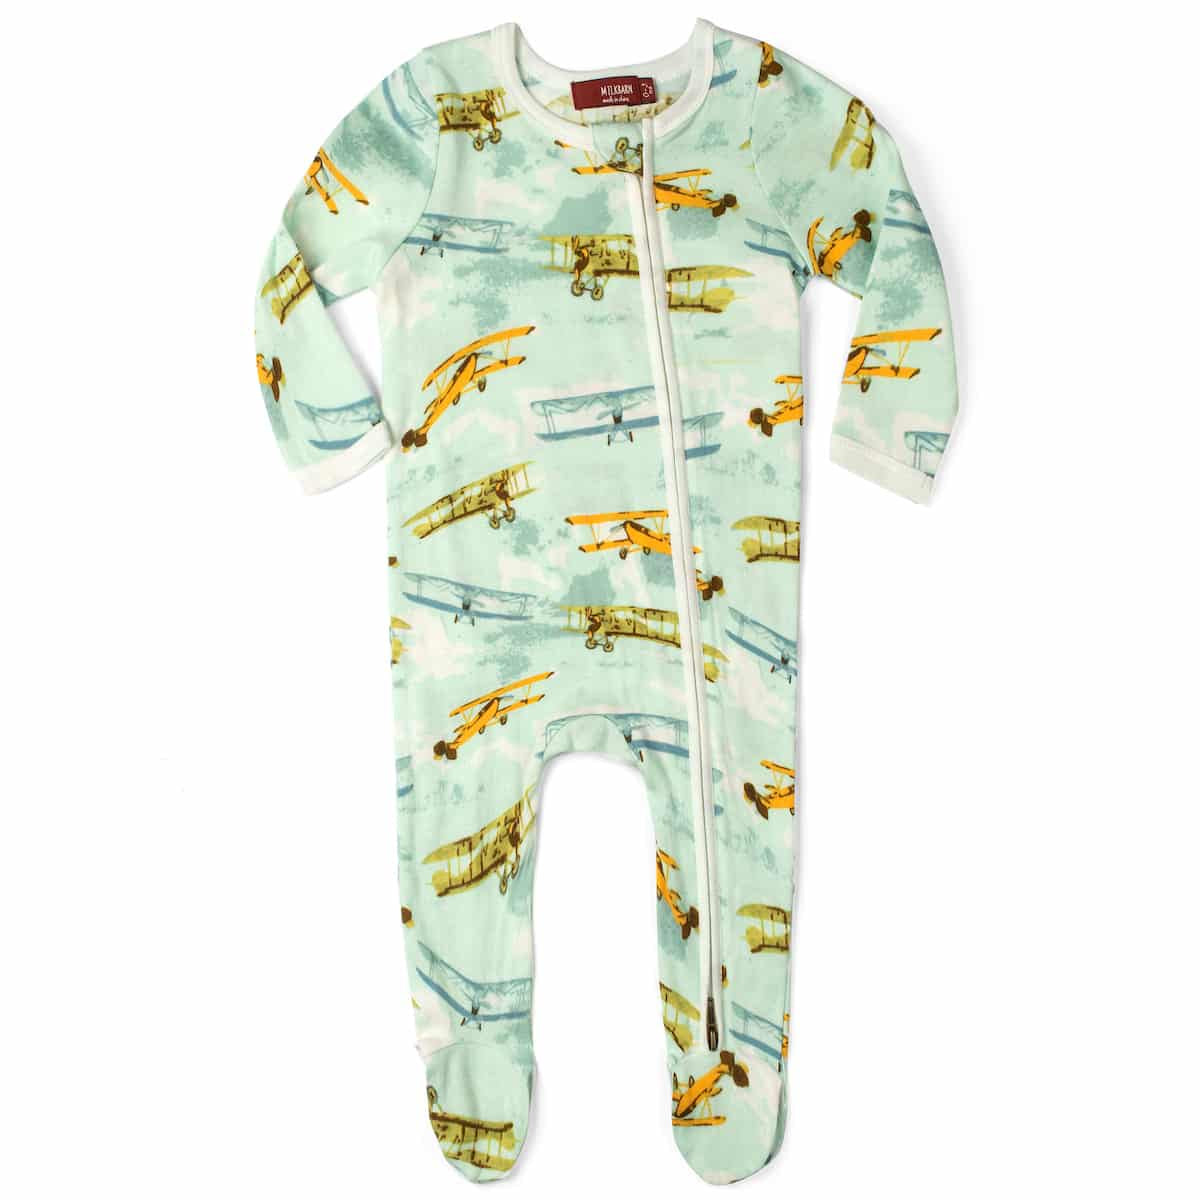 Vintage Planes Zippered Footed Romper 6-9 M